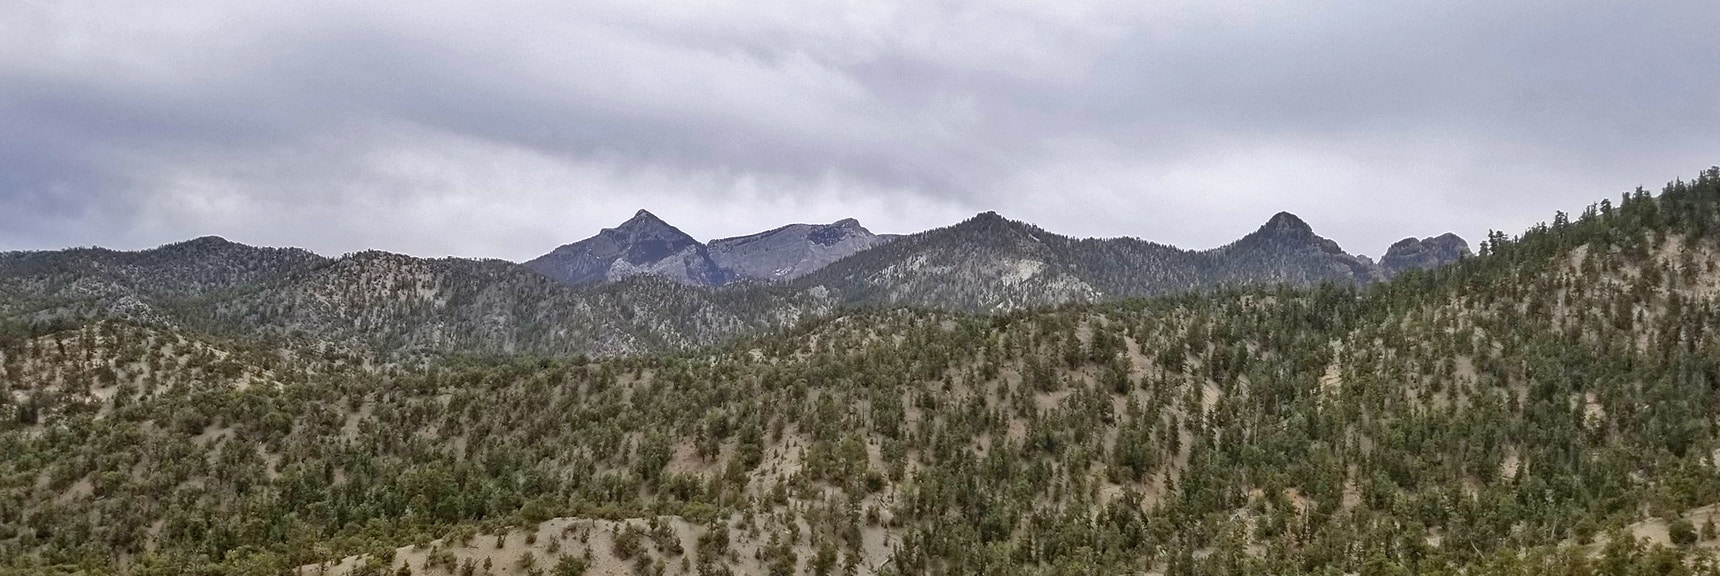 Mummy Mountain's Head Viewed from 9,235ft High Point Bluff | Sawmill Trail to McFarland Peak | Spring Mountains, Nevada